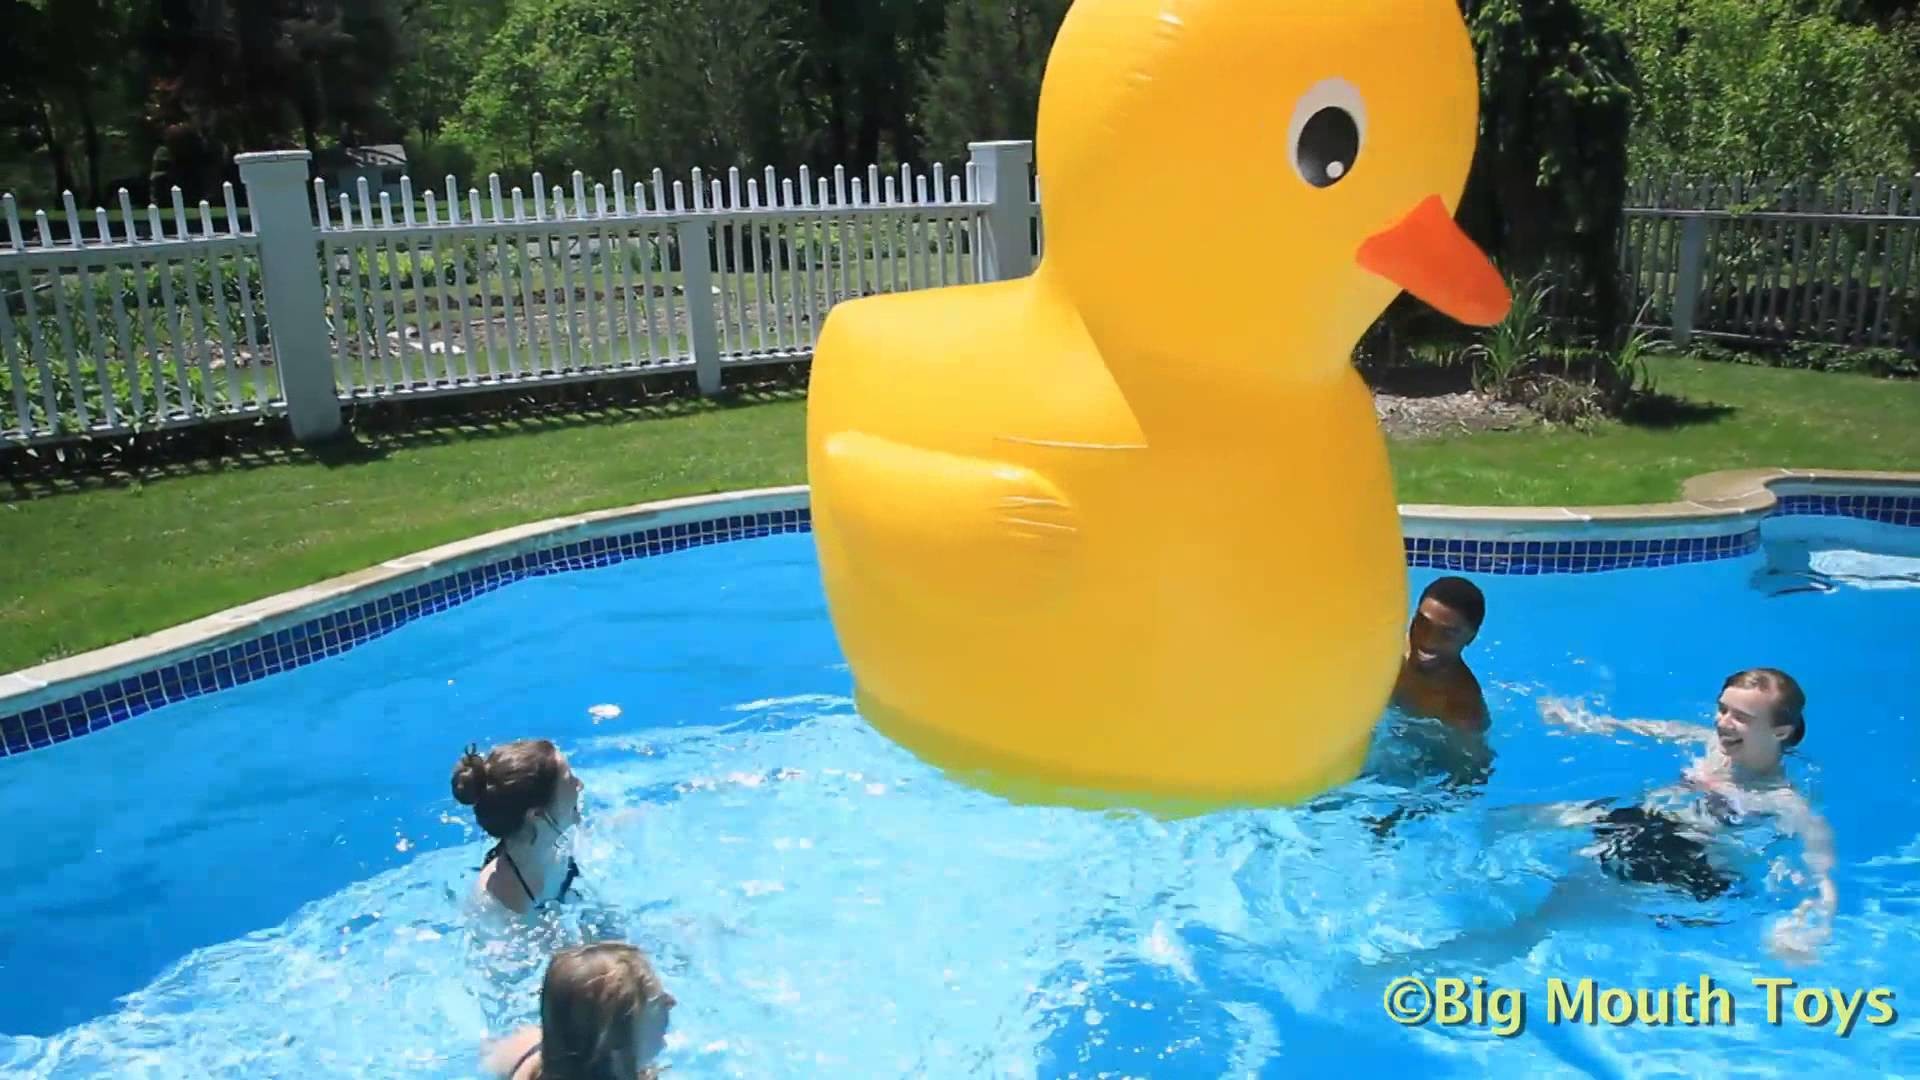 1920x1080 BigMouth - Inflatable Pool Float - Giant Rubber Ducky